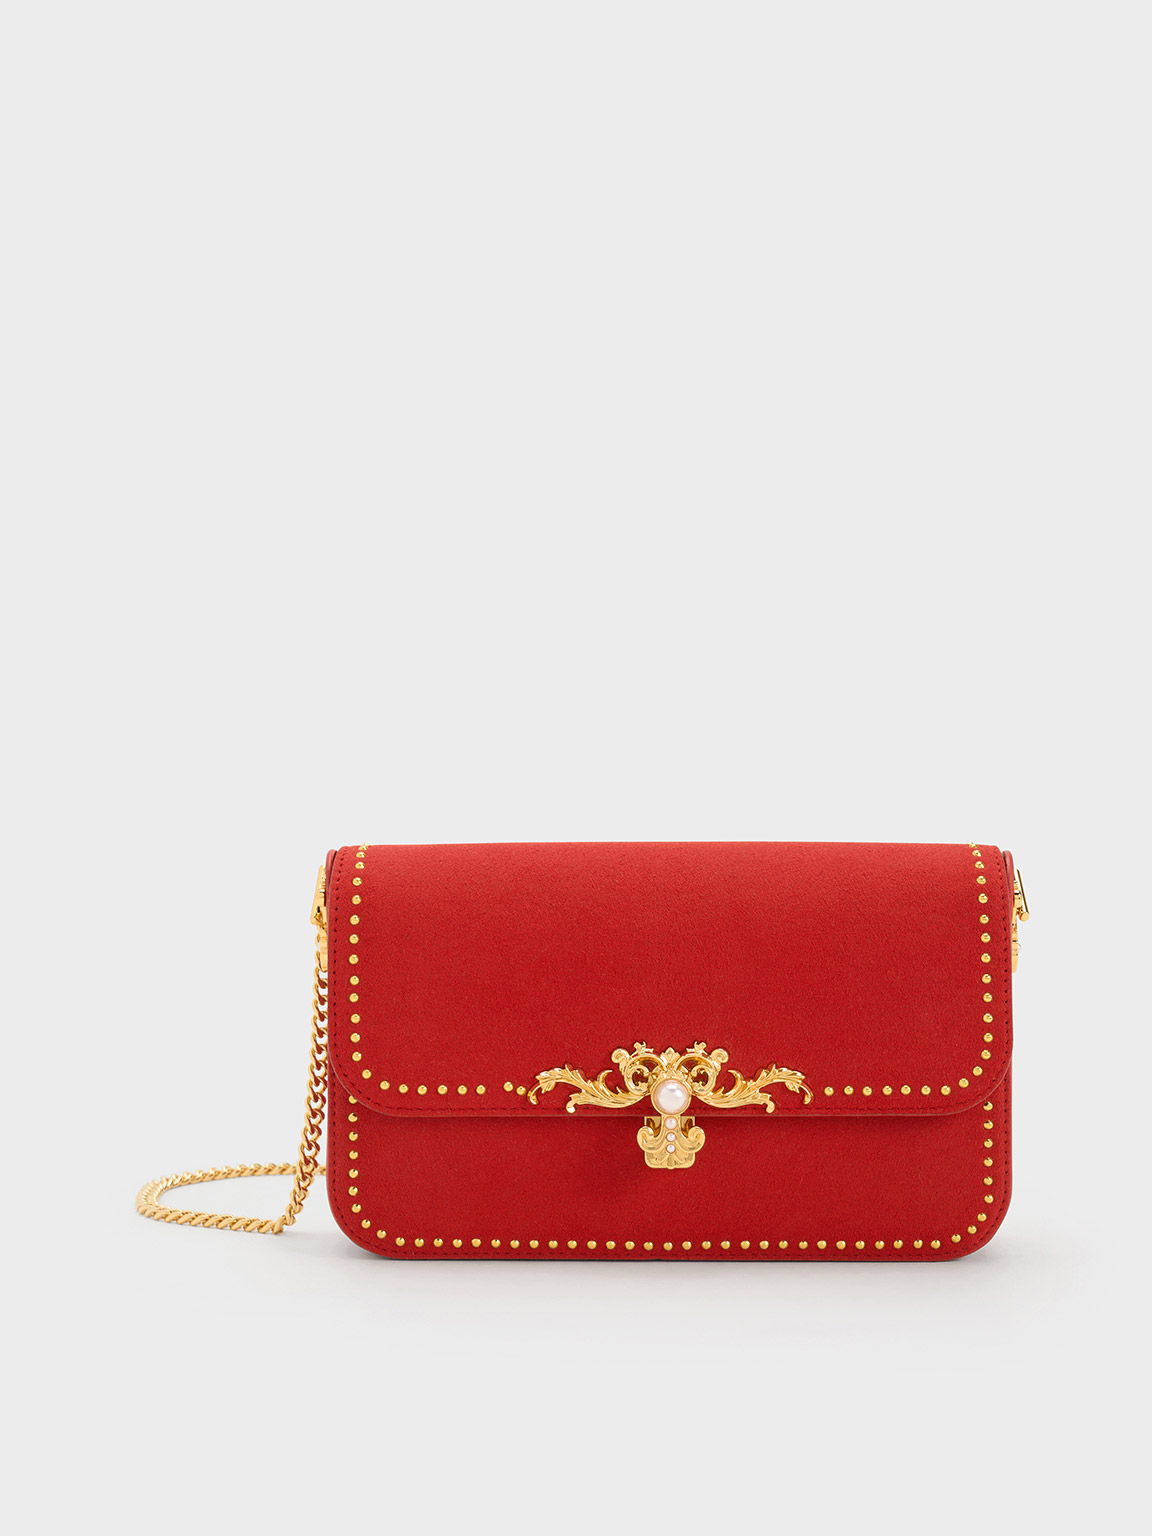 Charles & Keith Merial Metallic Accent Studded Clutch In Red